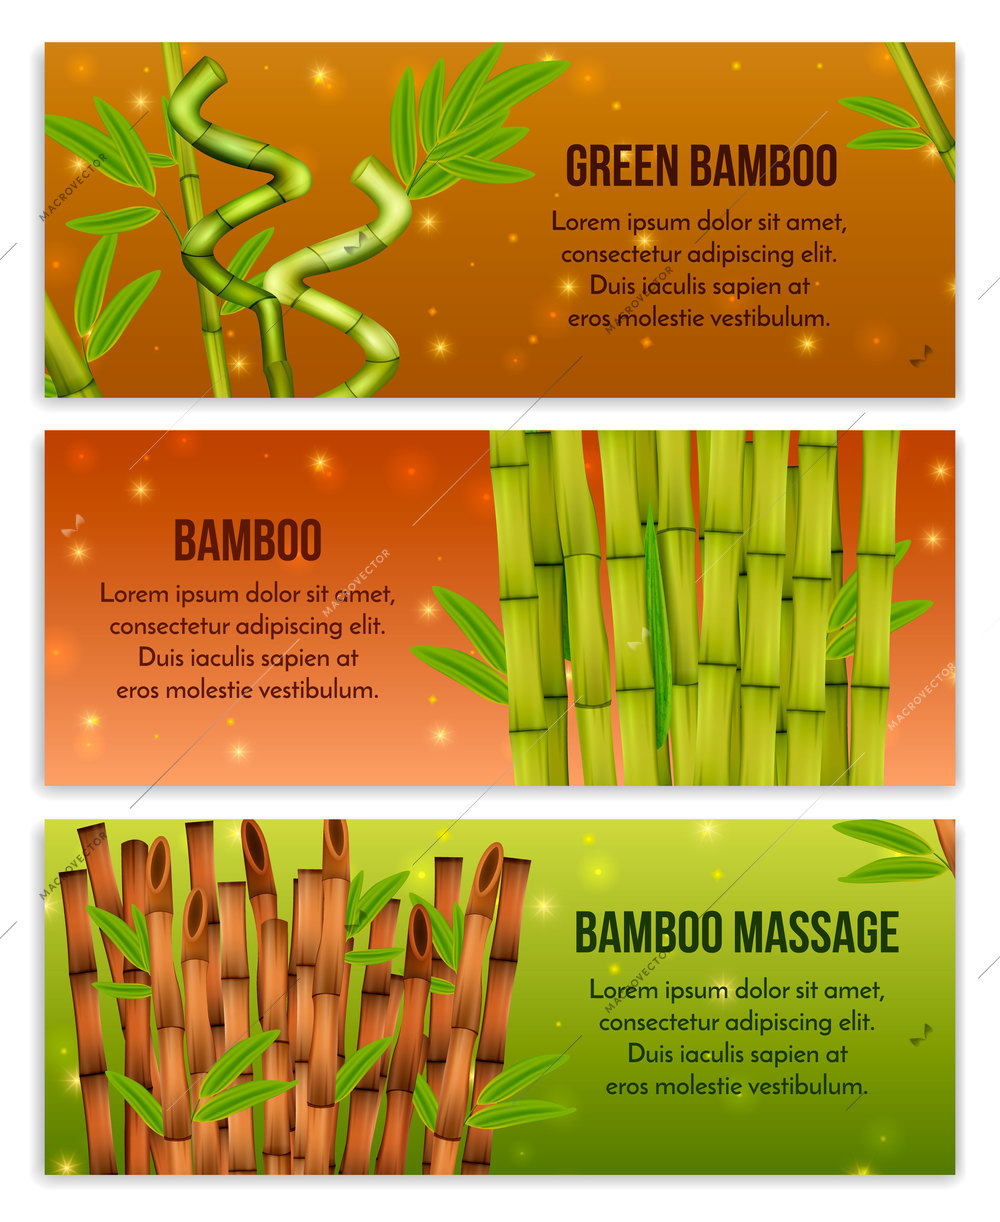 Green bamboo interior decorative elements and hollow canes massage tools 3 realistic horizontal banners isolated vector illustration